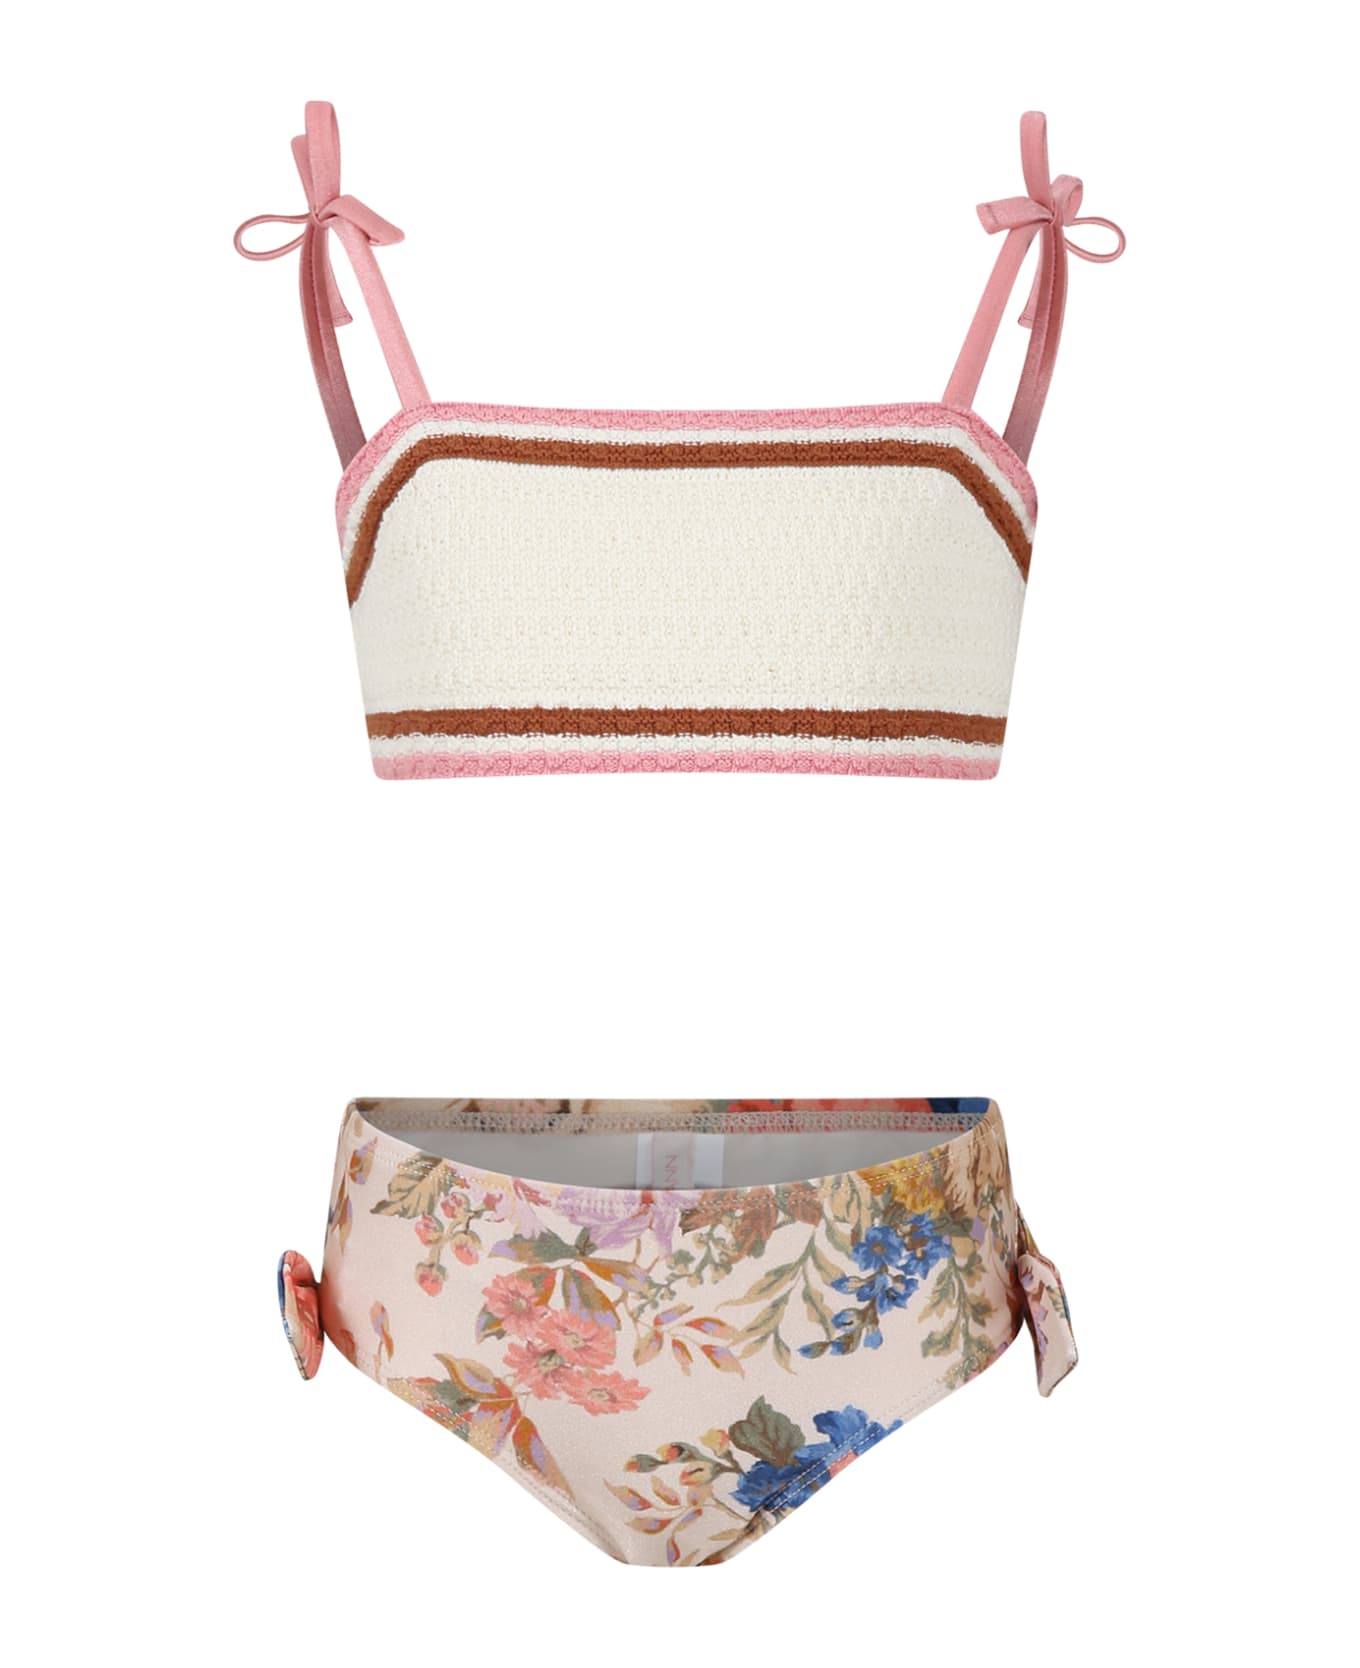 Zimmermann Ivory Bikini For Girl With Floral Print - Ivory